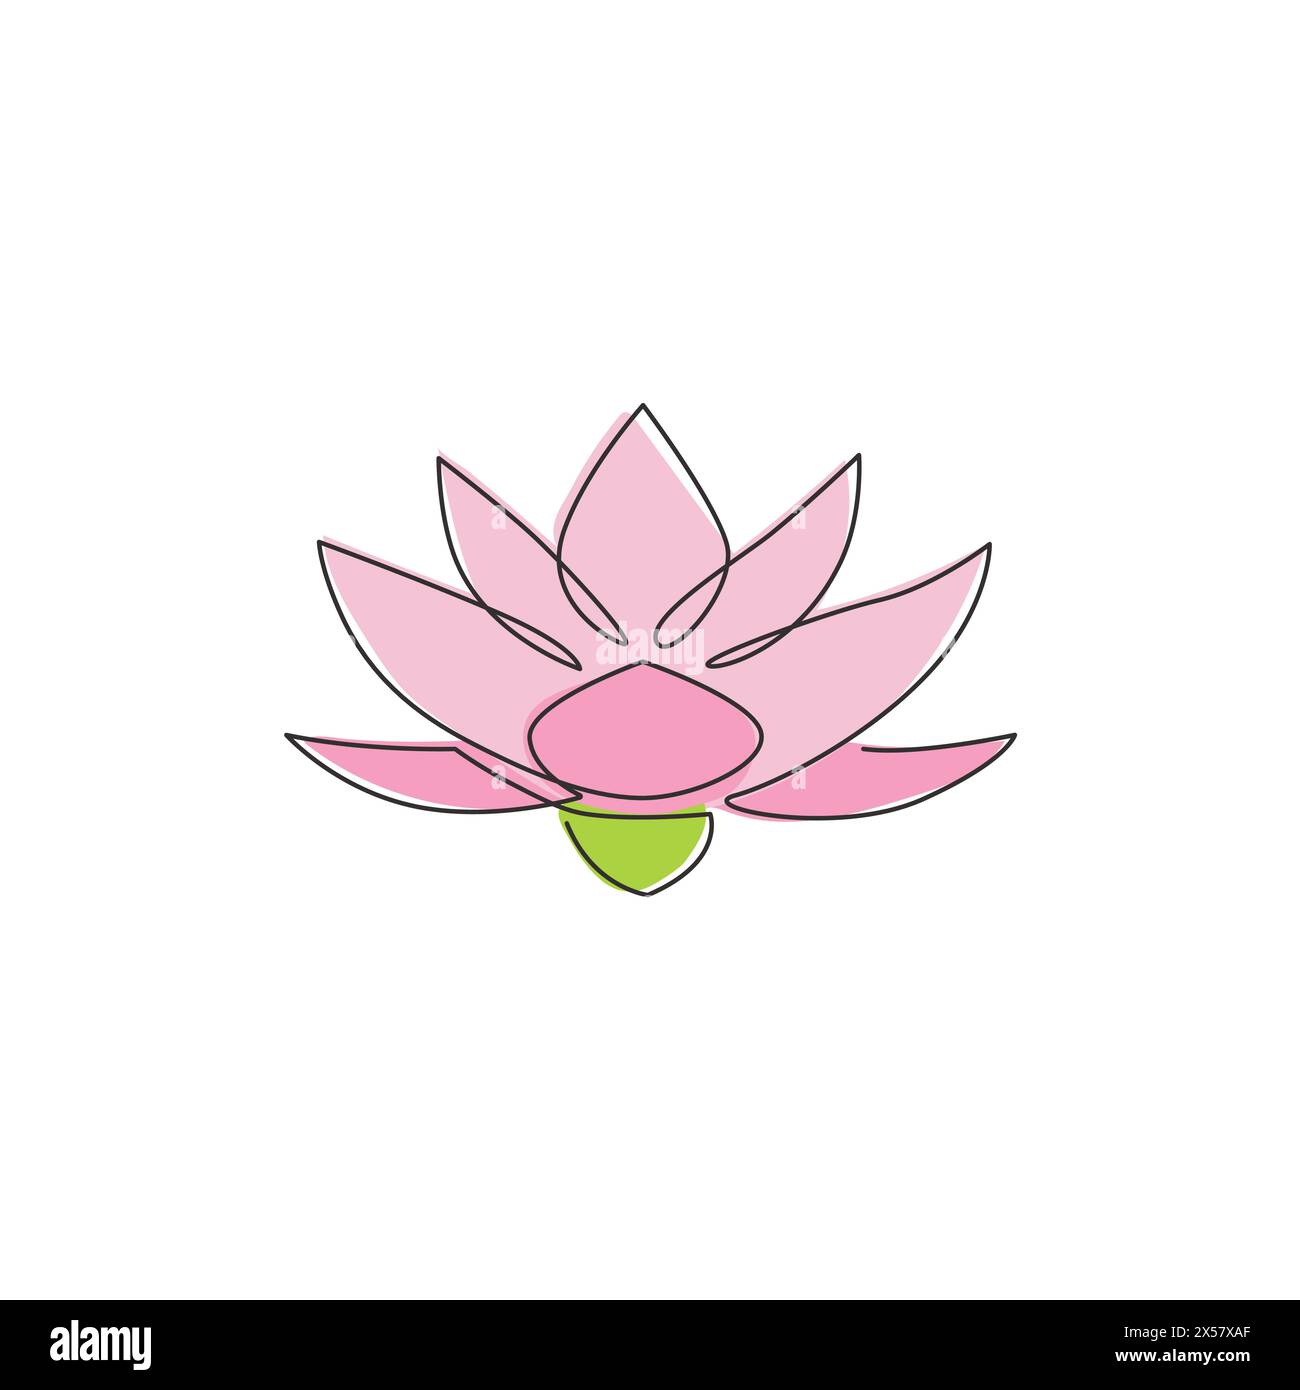 Single continuous line drawing of beauty fresh lotus for healthcare spa business logo. Printable decorative water lily flower concept home wall decor Stock Vector